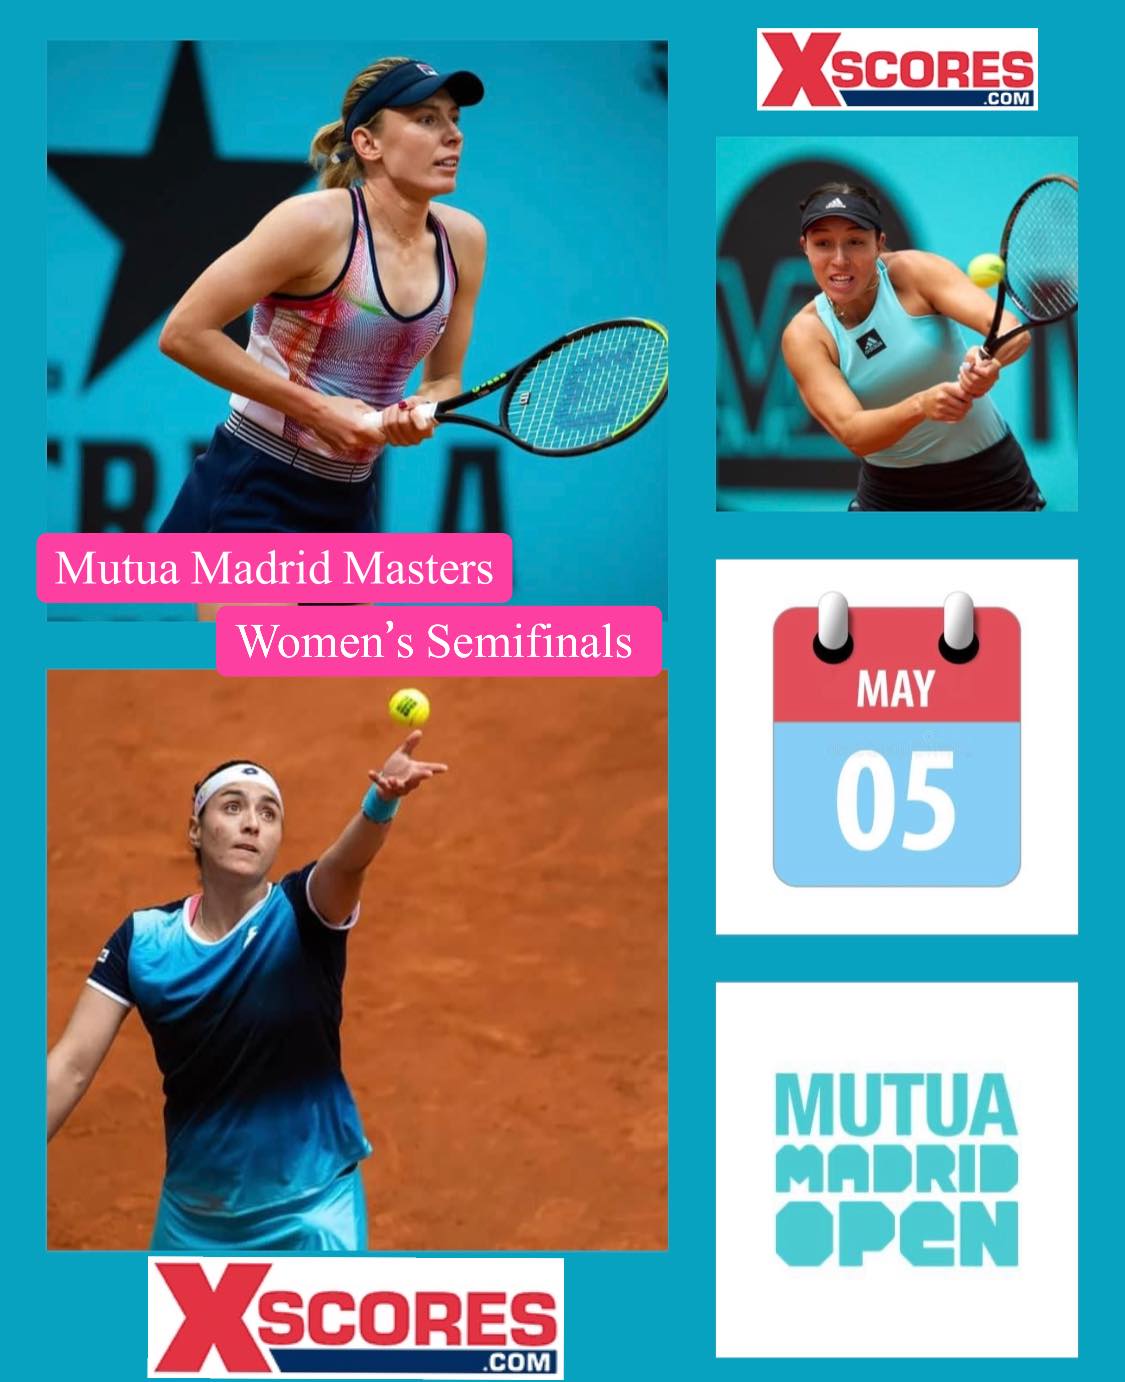 dramatic Fictitious Peregrination 🎾🎾Tennis- WTA Tour 1000 – Surface: Outdoor Clay – Mutua Madrid Open,  MADRID, SPAIN🎾🎾 – Thursday, 05th May 2022. 🎾WOMENS SINGLES – SEMIFINALS  - Xscores News